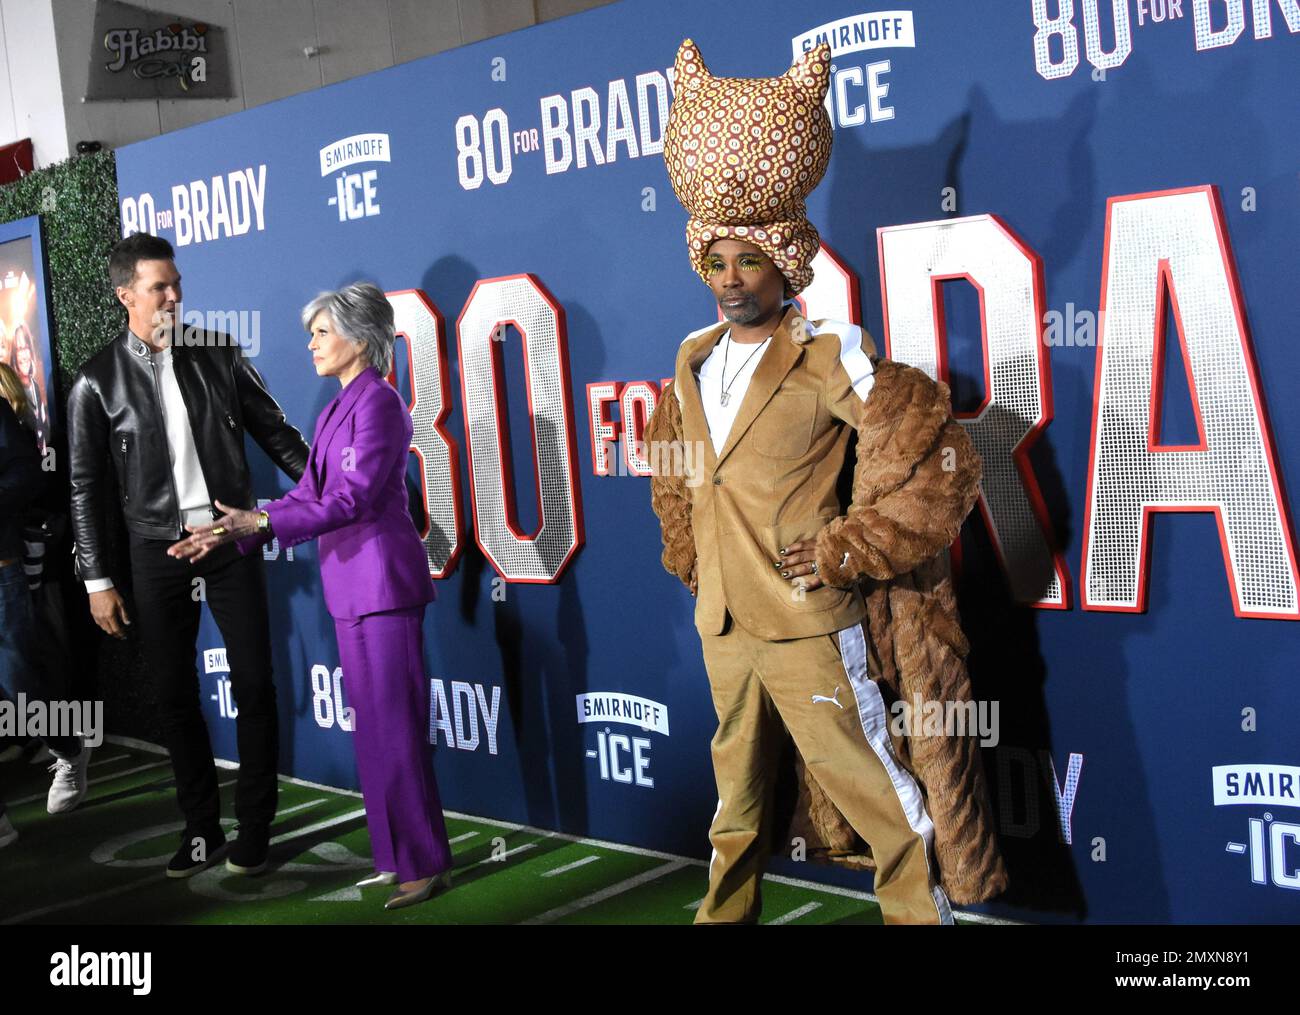 Los Angeles, California, USA 31st January 2023 Tom Brady, Actress Jane Fonda and Actor Billy Porter attend the Los Angeles Premiere Screening of Paramount Pictures' '80 for Brady' at Regency Village Theatre on January 31, 2023 in Los Angeles, California, USA. Photo by Barry King/Alamy Stock Photo Stock Photo